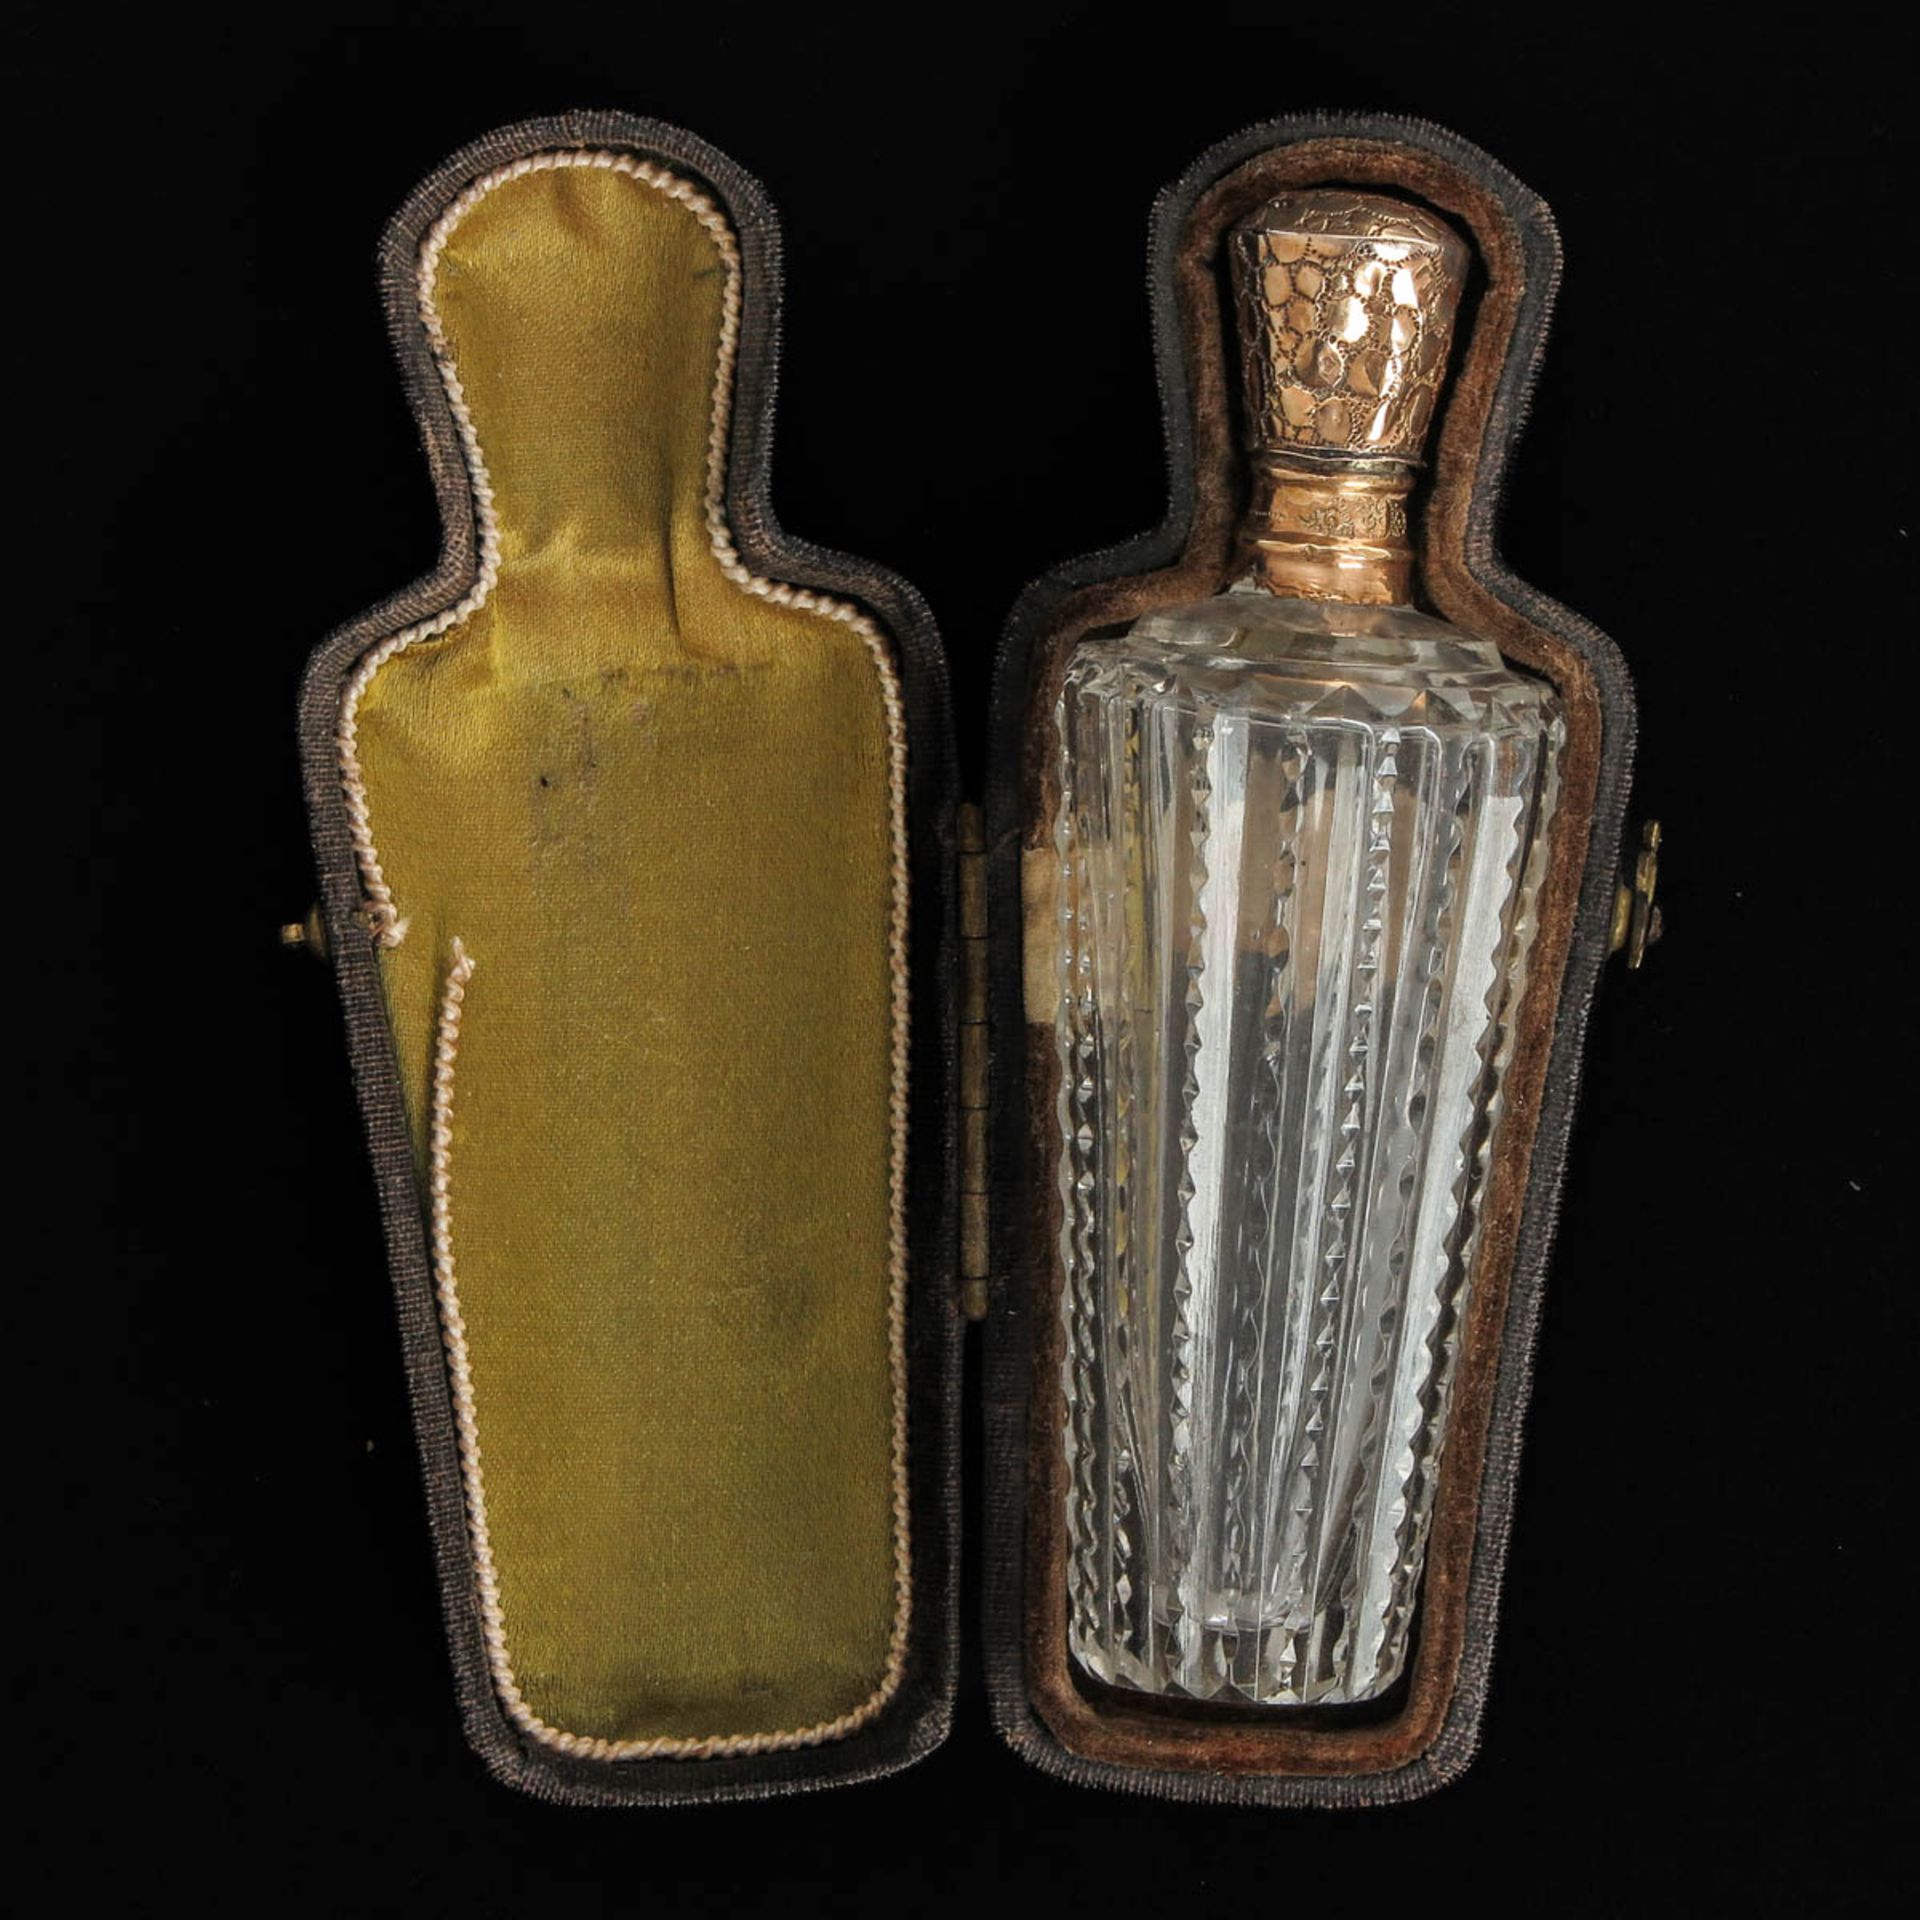 A Lot of 2 Perfume Bottles - Image 9 of 9